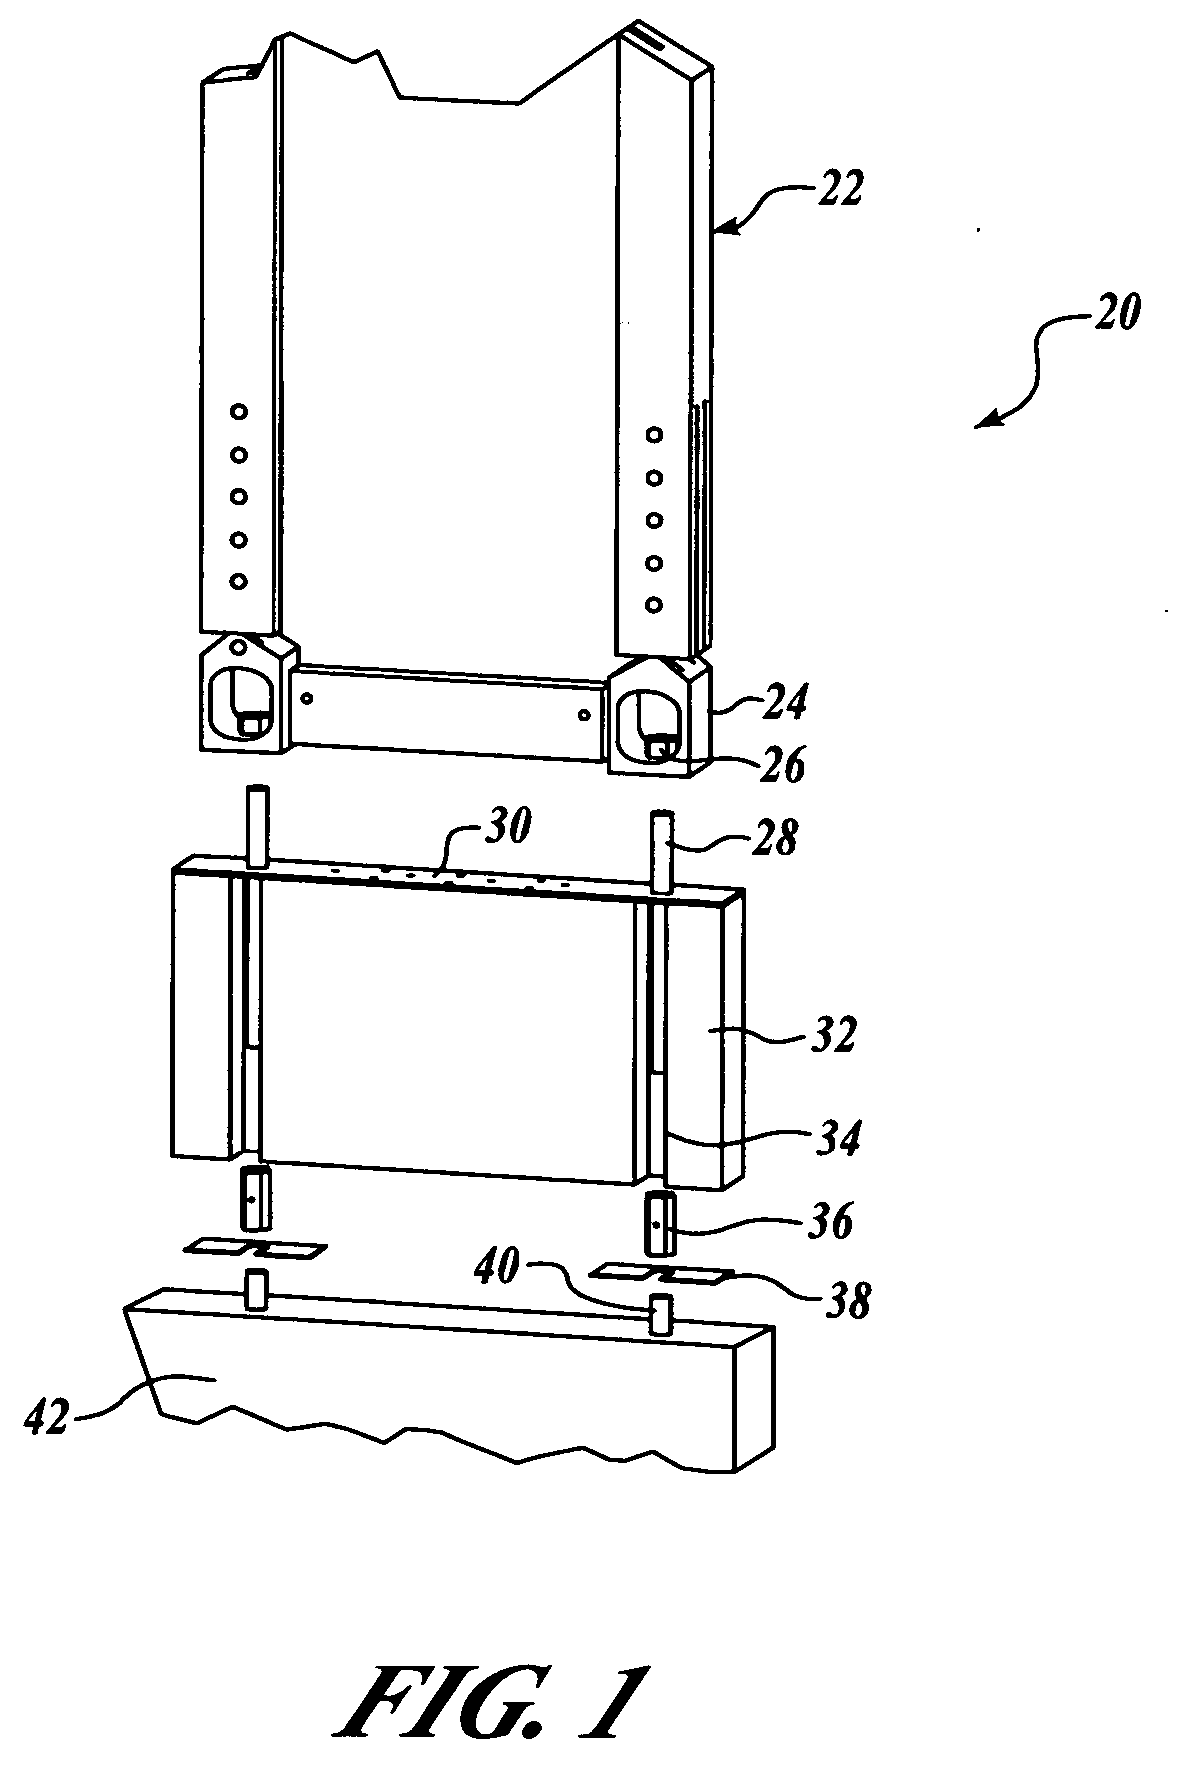 Shear wall attachment assembly and method of use